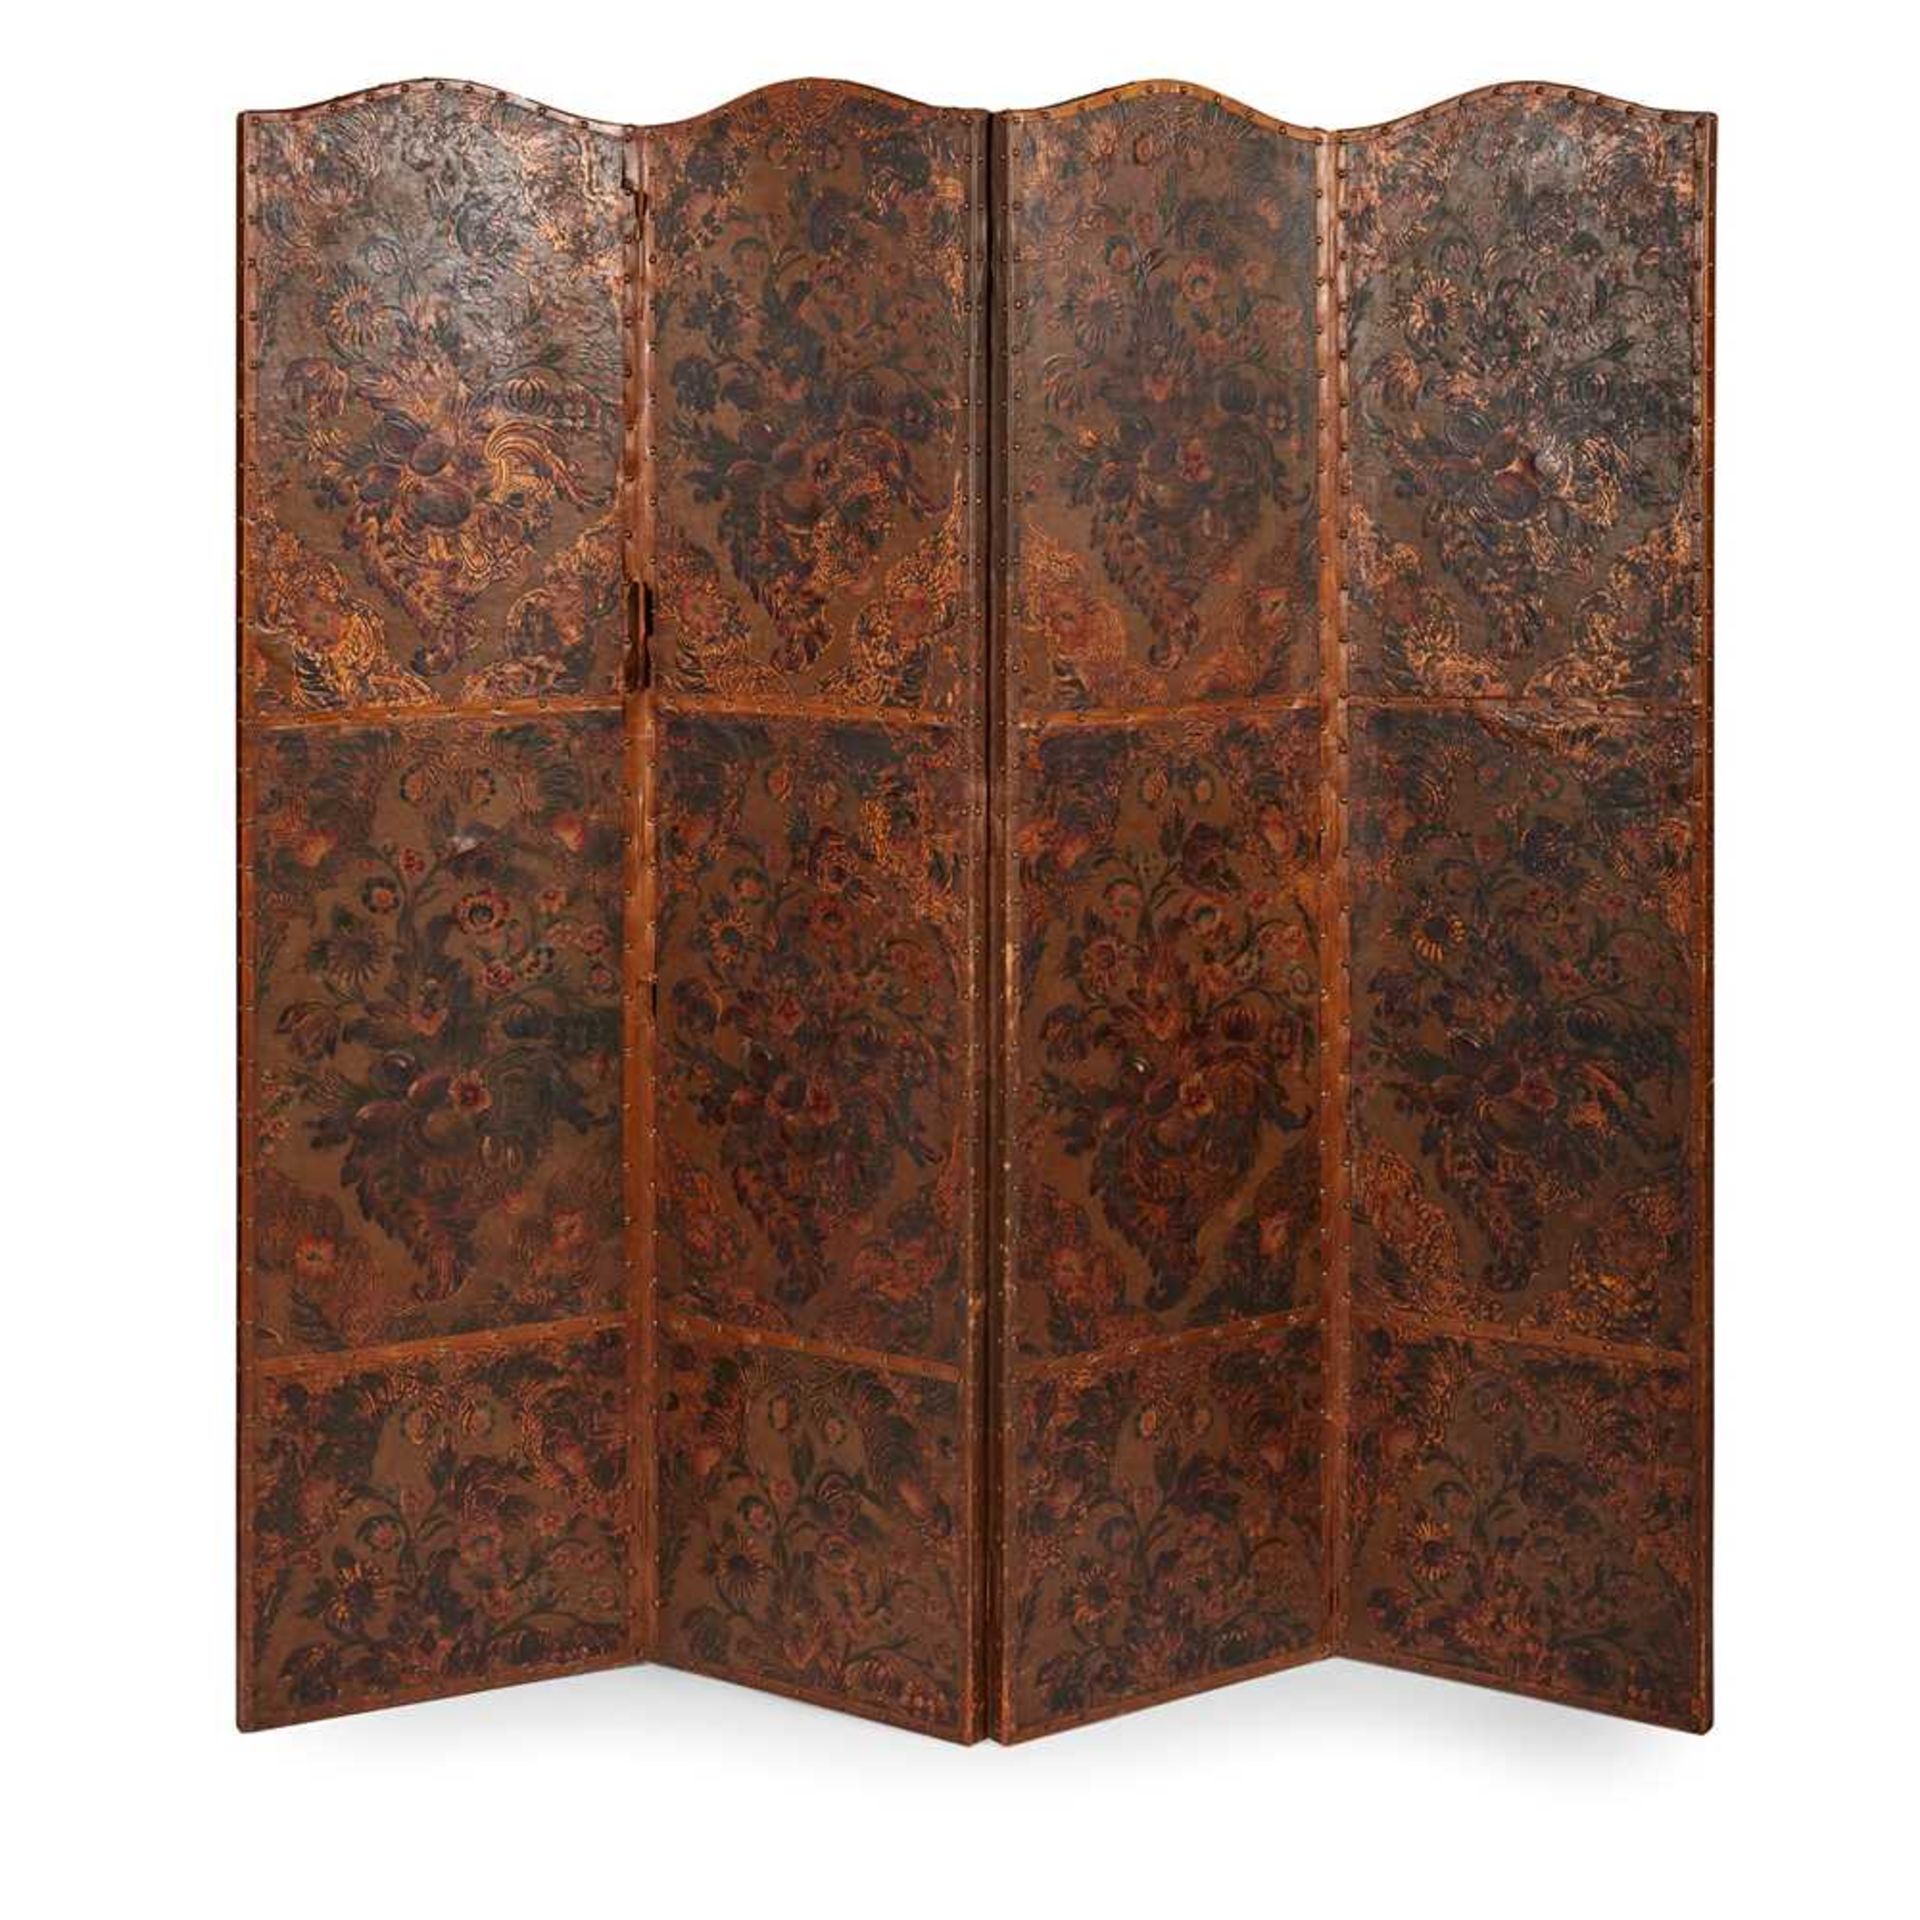 CONTINENTAL EMBOSSED AND POLYCHROMED LEATHER FOUR-FOLD SCREEN 19TH CENTURY